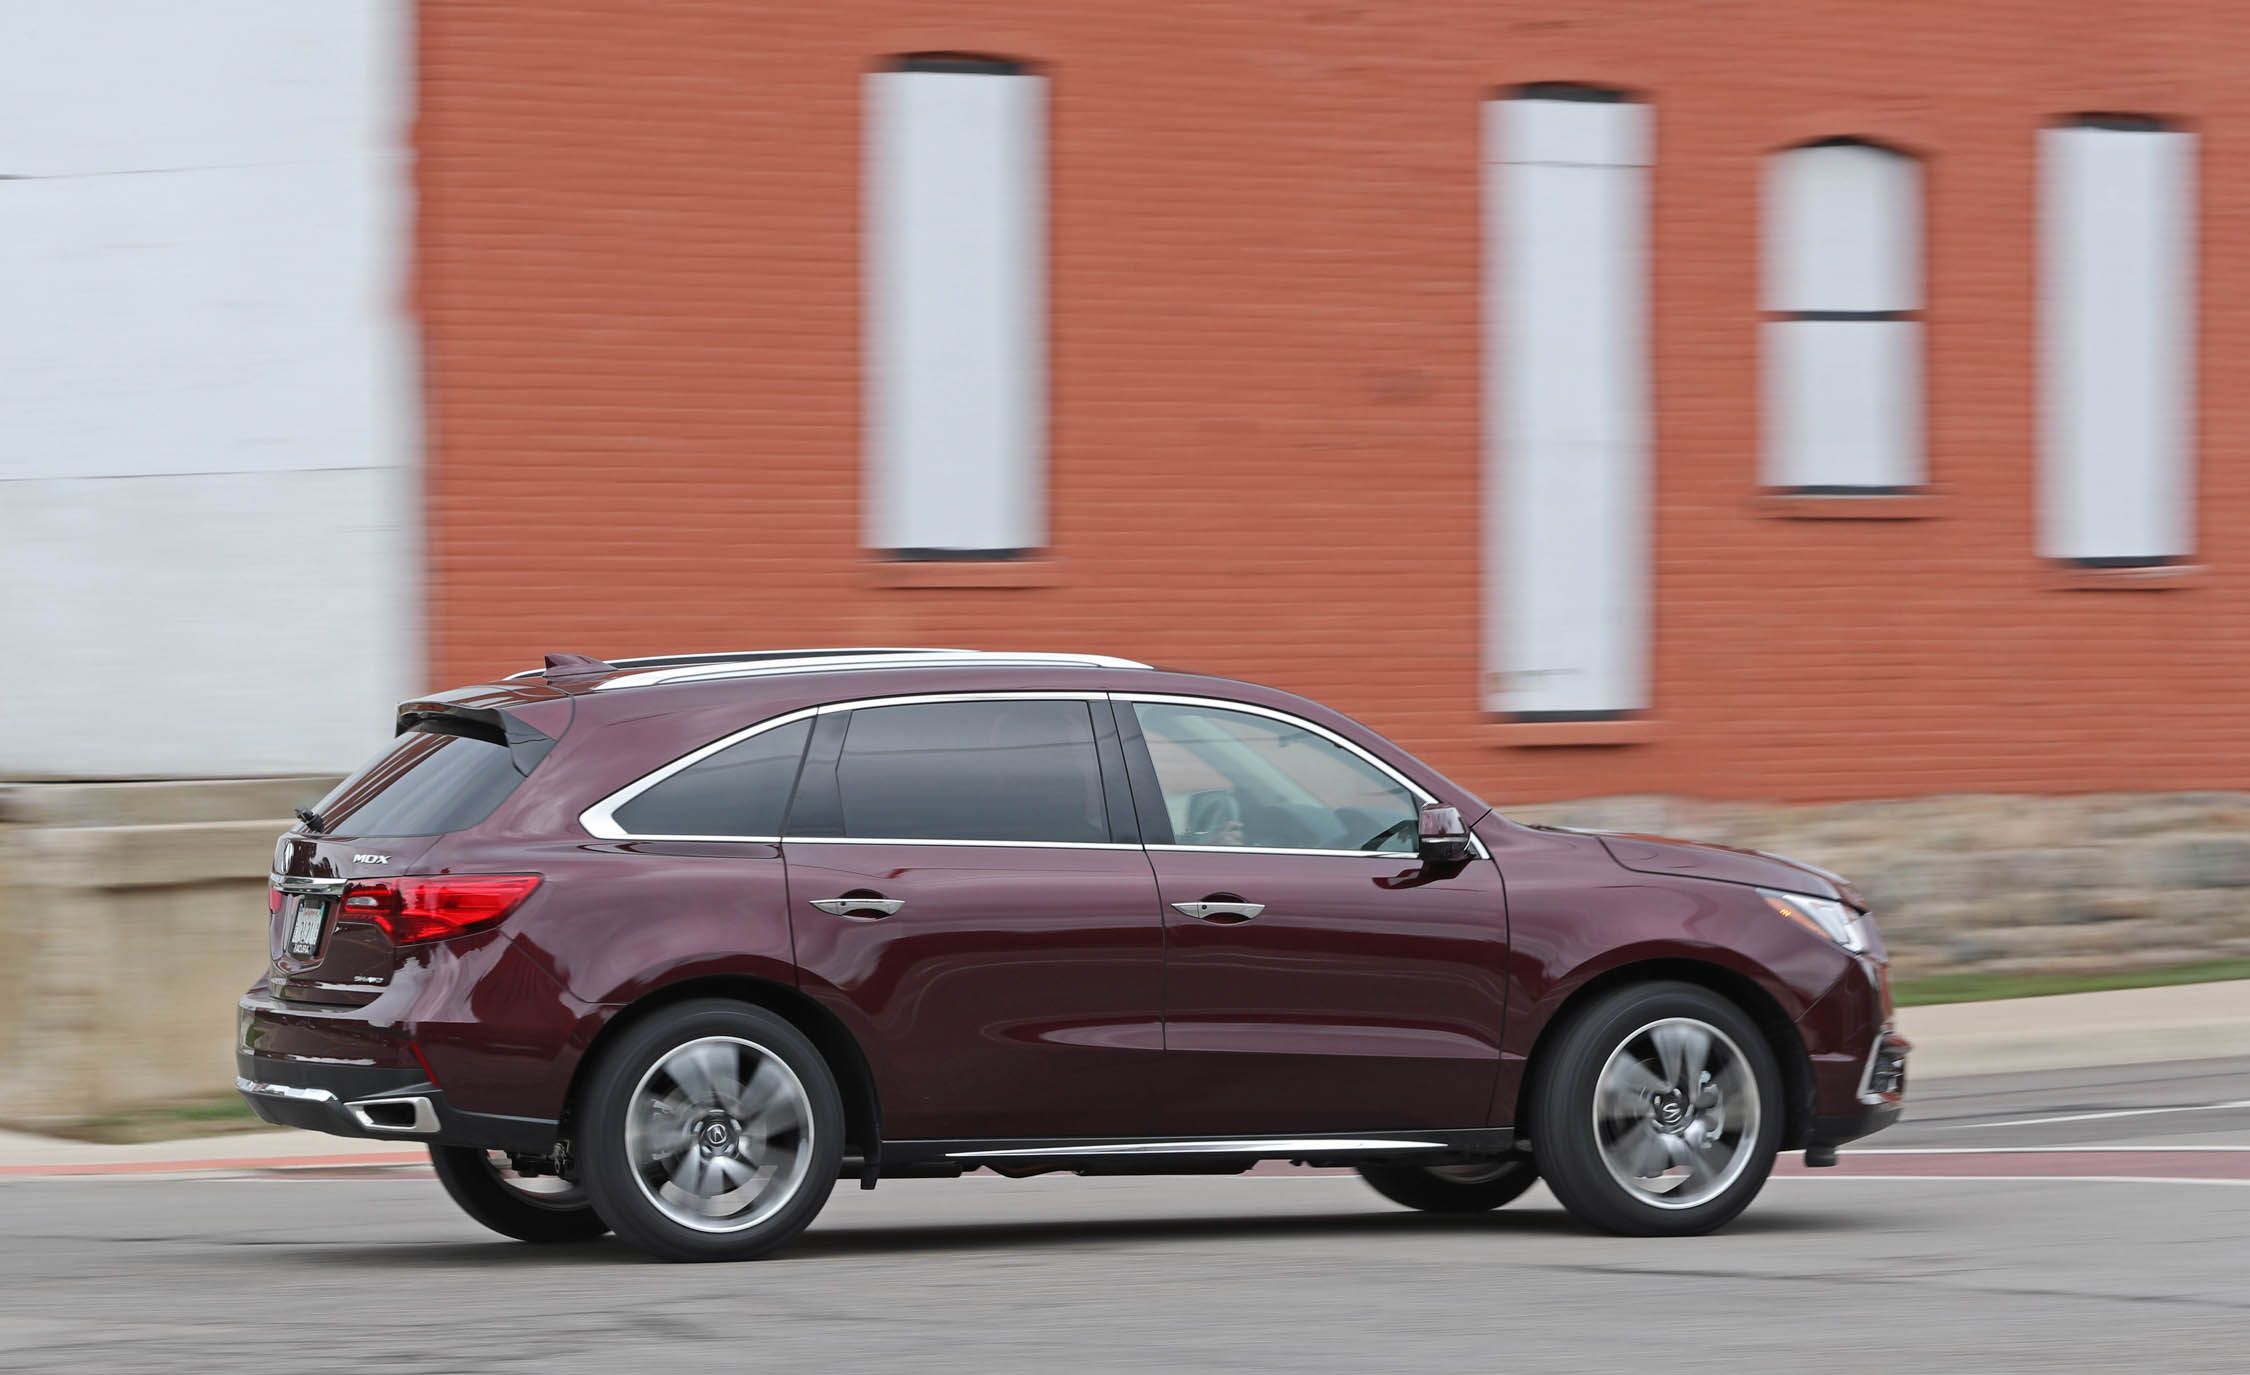 2017 Acura Mdx Test Drive Side View (View 2 of 22)